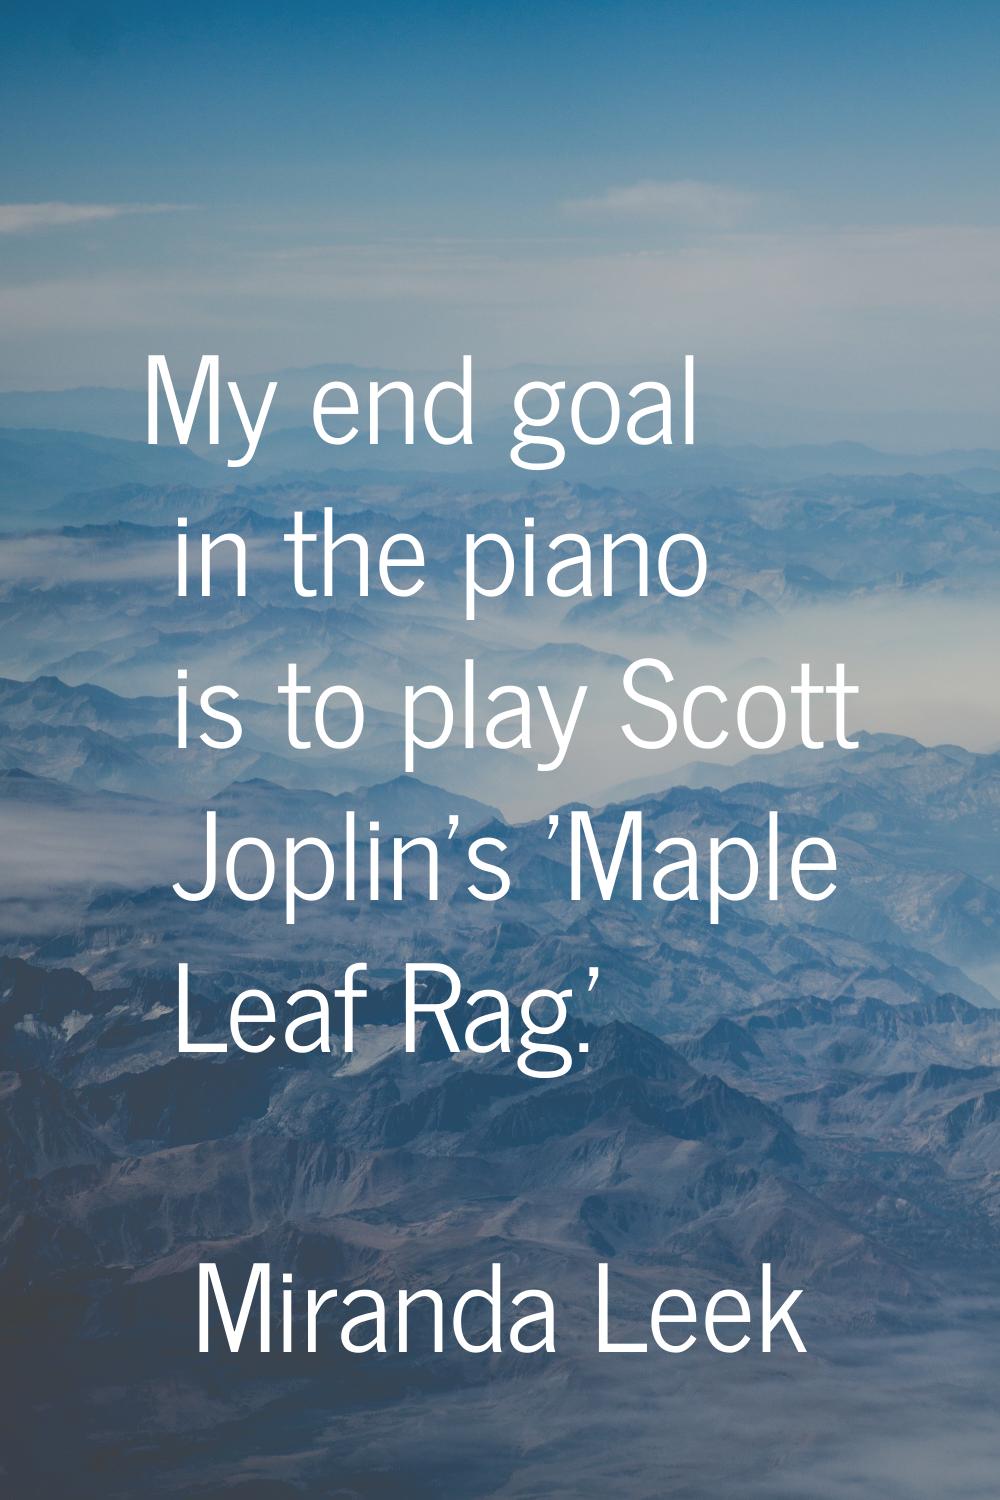 My end goal in the piano is to play Scott Joplin's 'Maple Leaf Rag.'